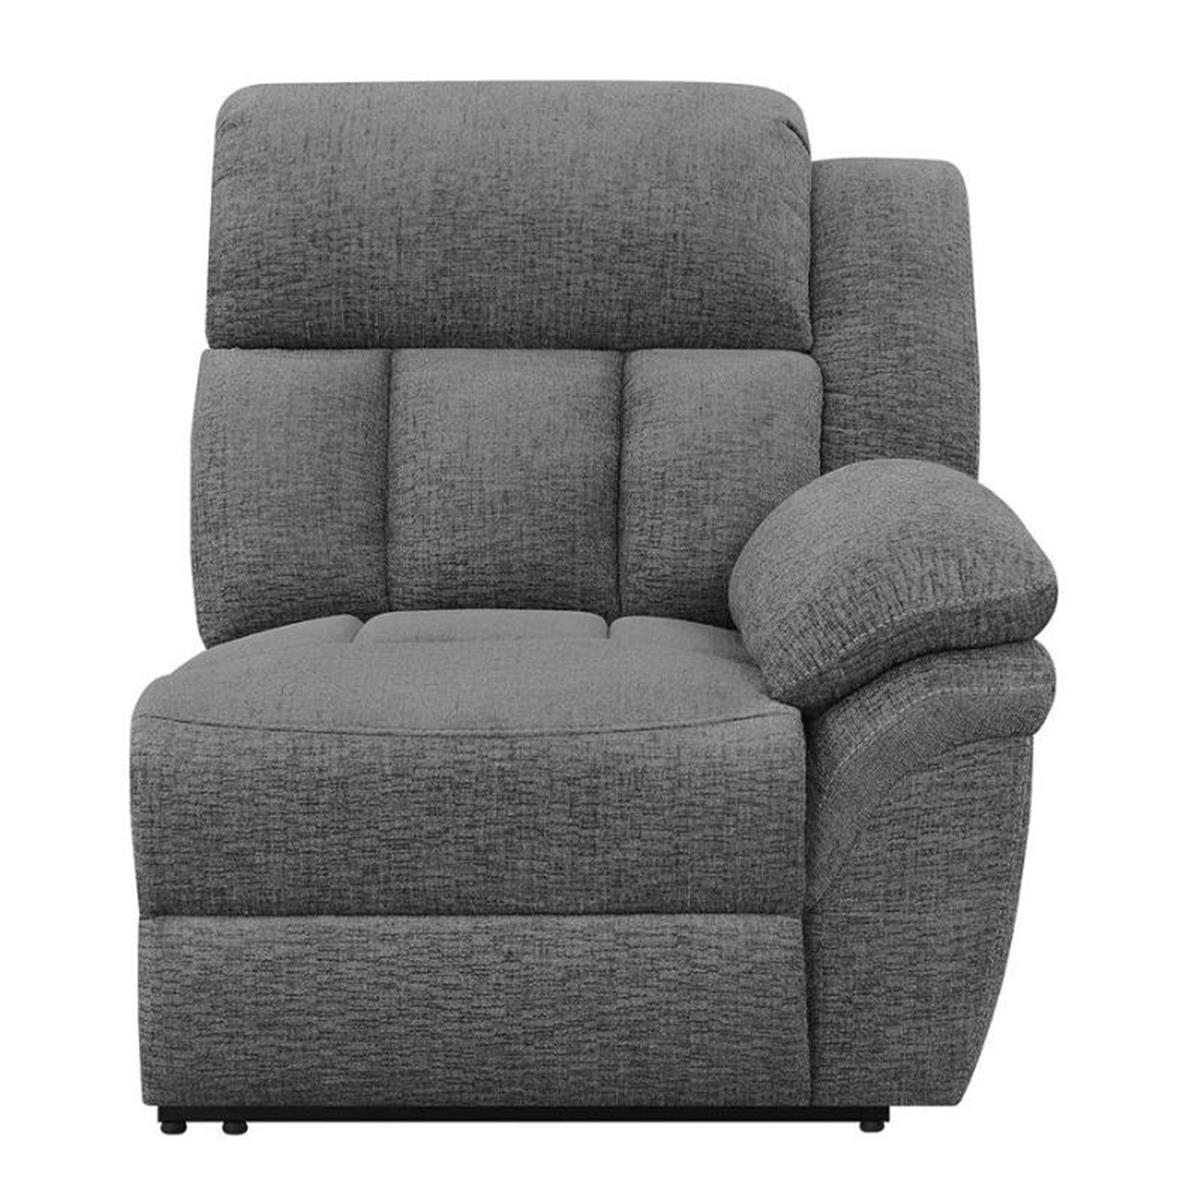 Picture of Coaster Furniture 609540RRP 39.75 x 36.5 x 38.25 in. Raf Power Recliner